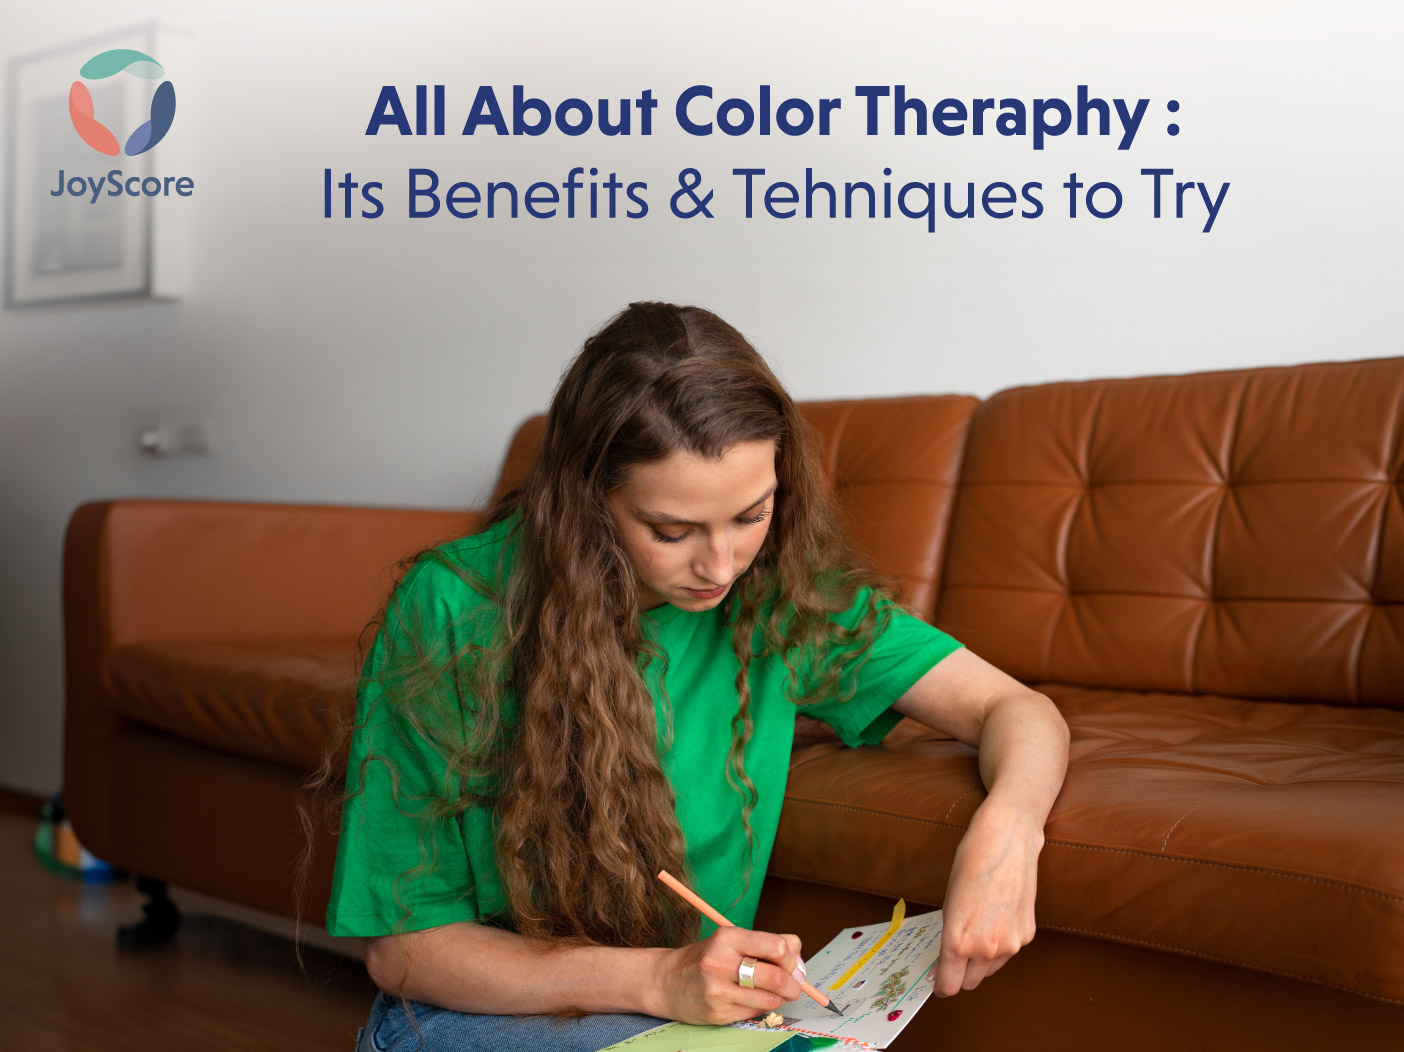 Color Therapy: Benefits, Techniques, And How To Use Color Therapy For Mental Health